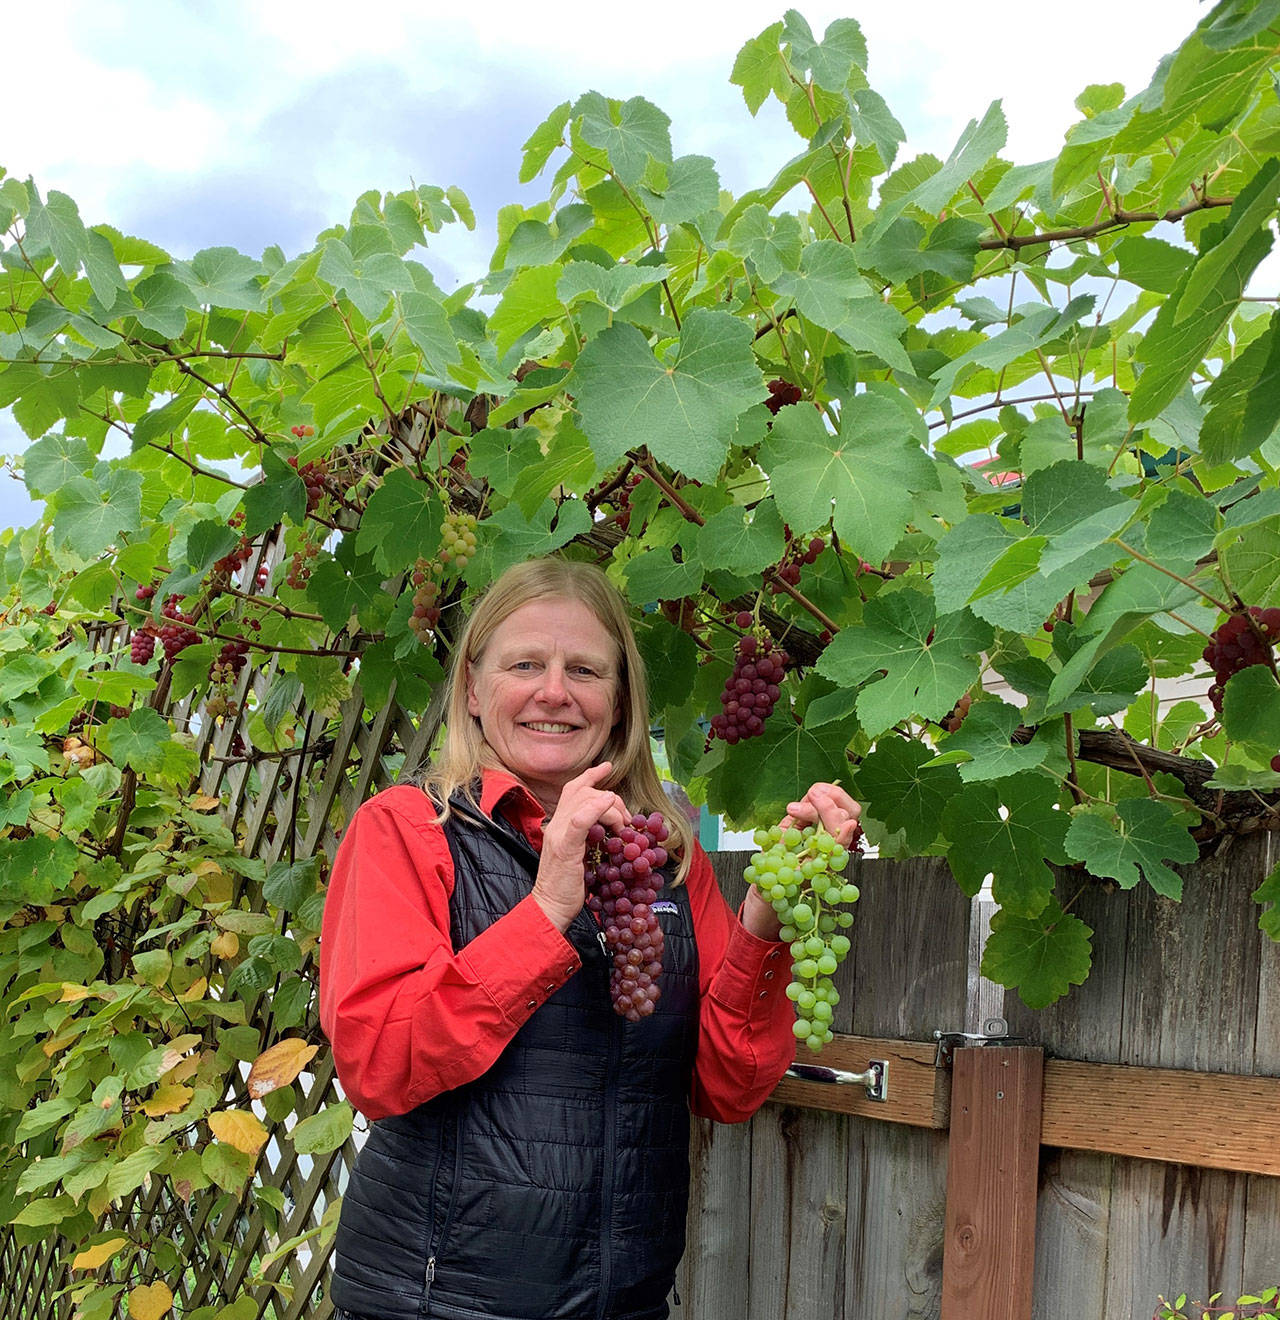 Selinda Barkhuis displays Himrod and Einset grapes grown on her city lot in central Port Angeles. (Betty Harriman)